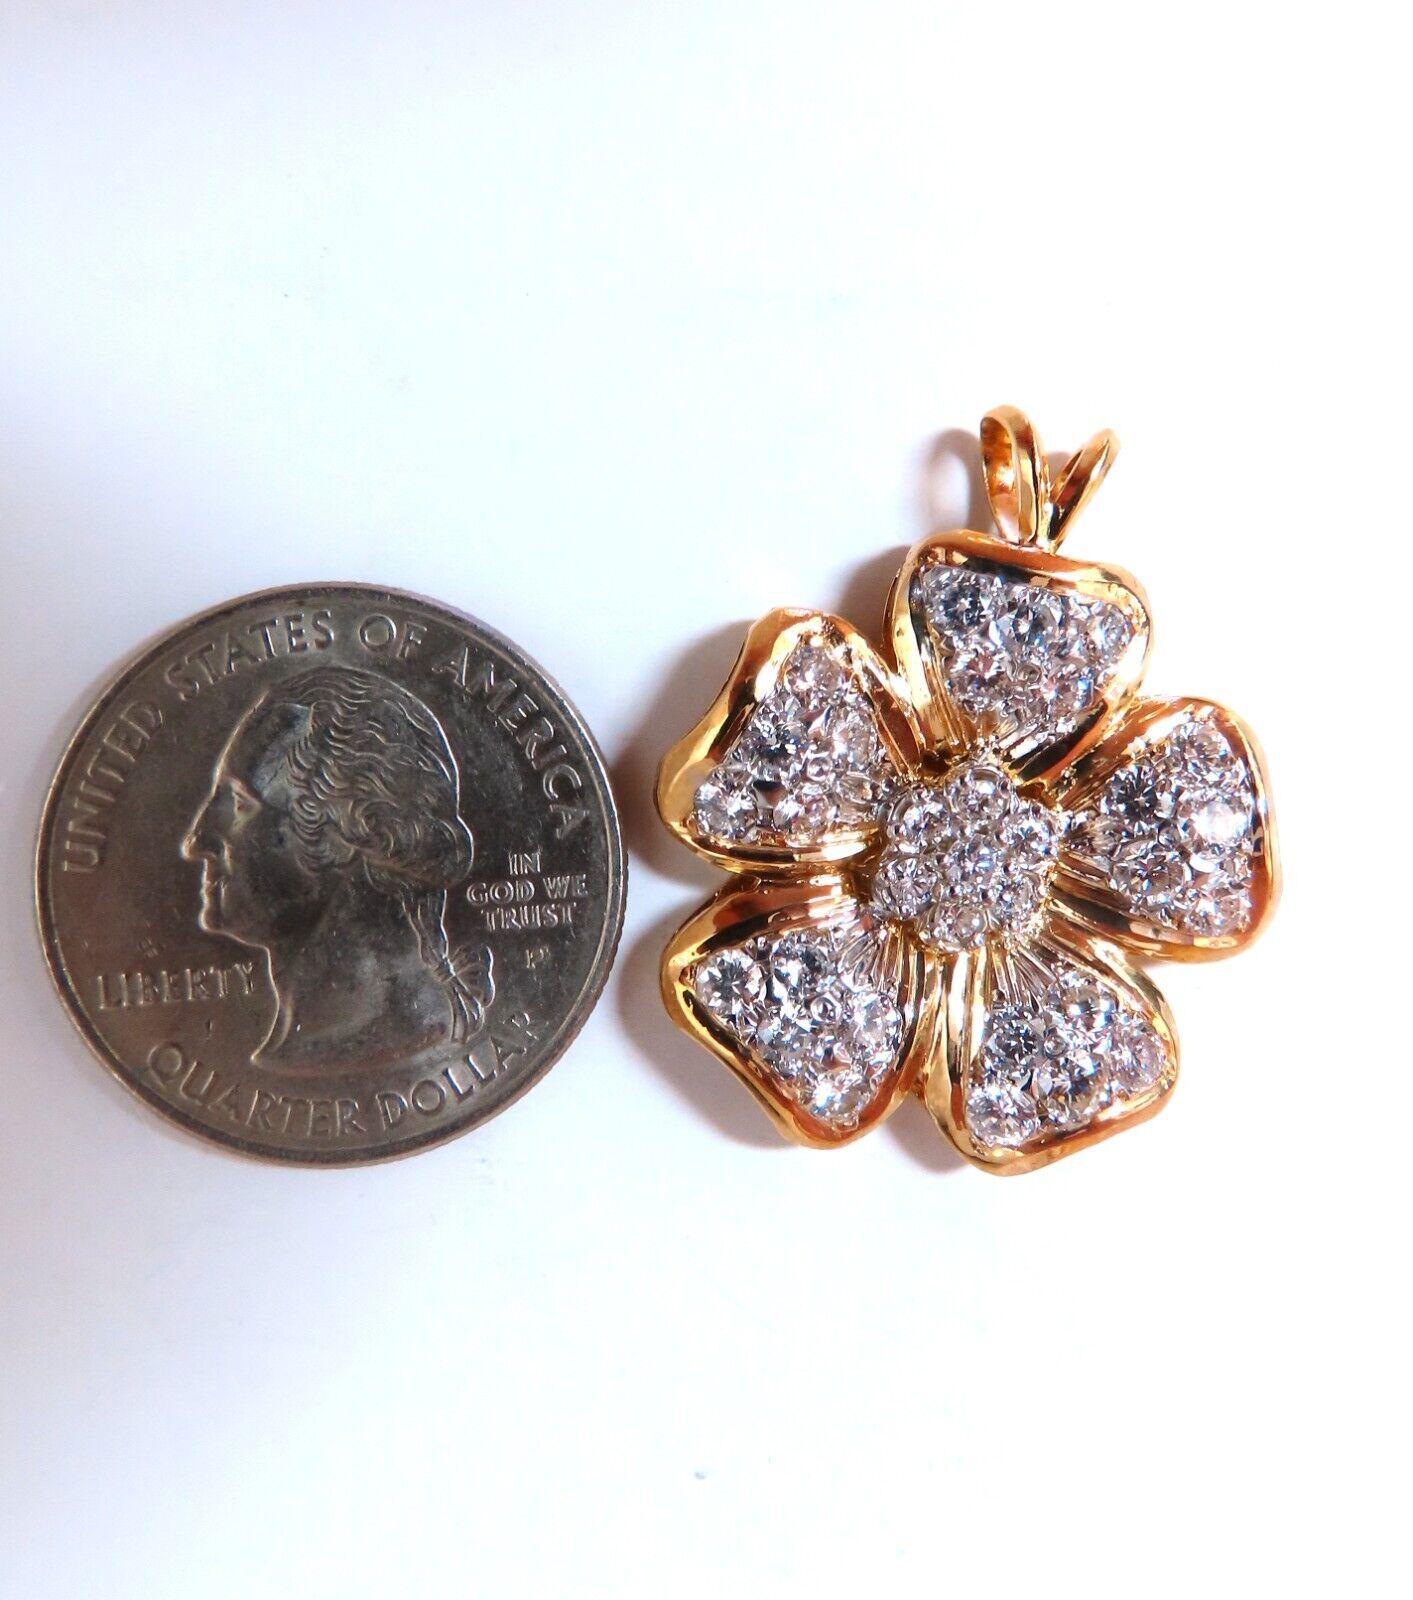 Large Cluster Flower Motif Pendant

2ct. Diamonds cluster

All diamonds: full cut & rounds

G color, Vs-2 clarity.

14kt. yellow gold.

8.3 grams

25 x 23mm

$7000 Appraisal will accompany